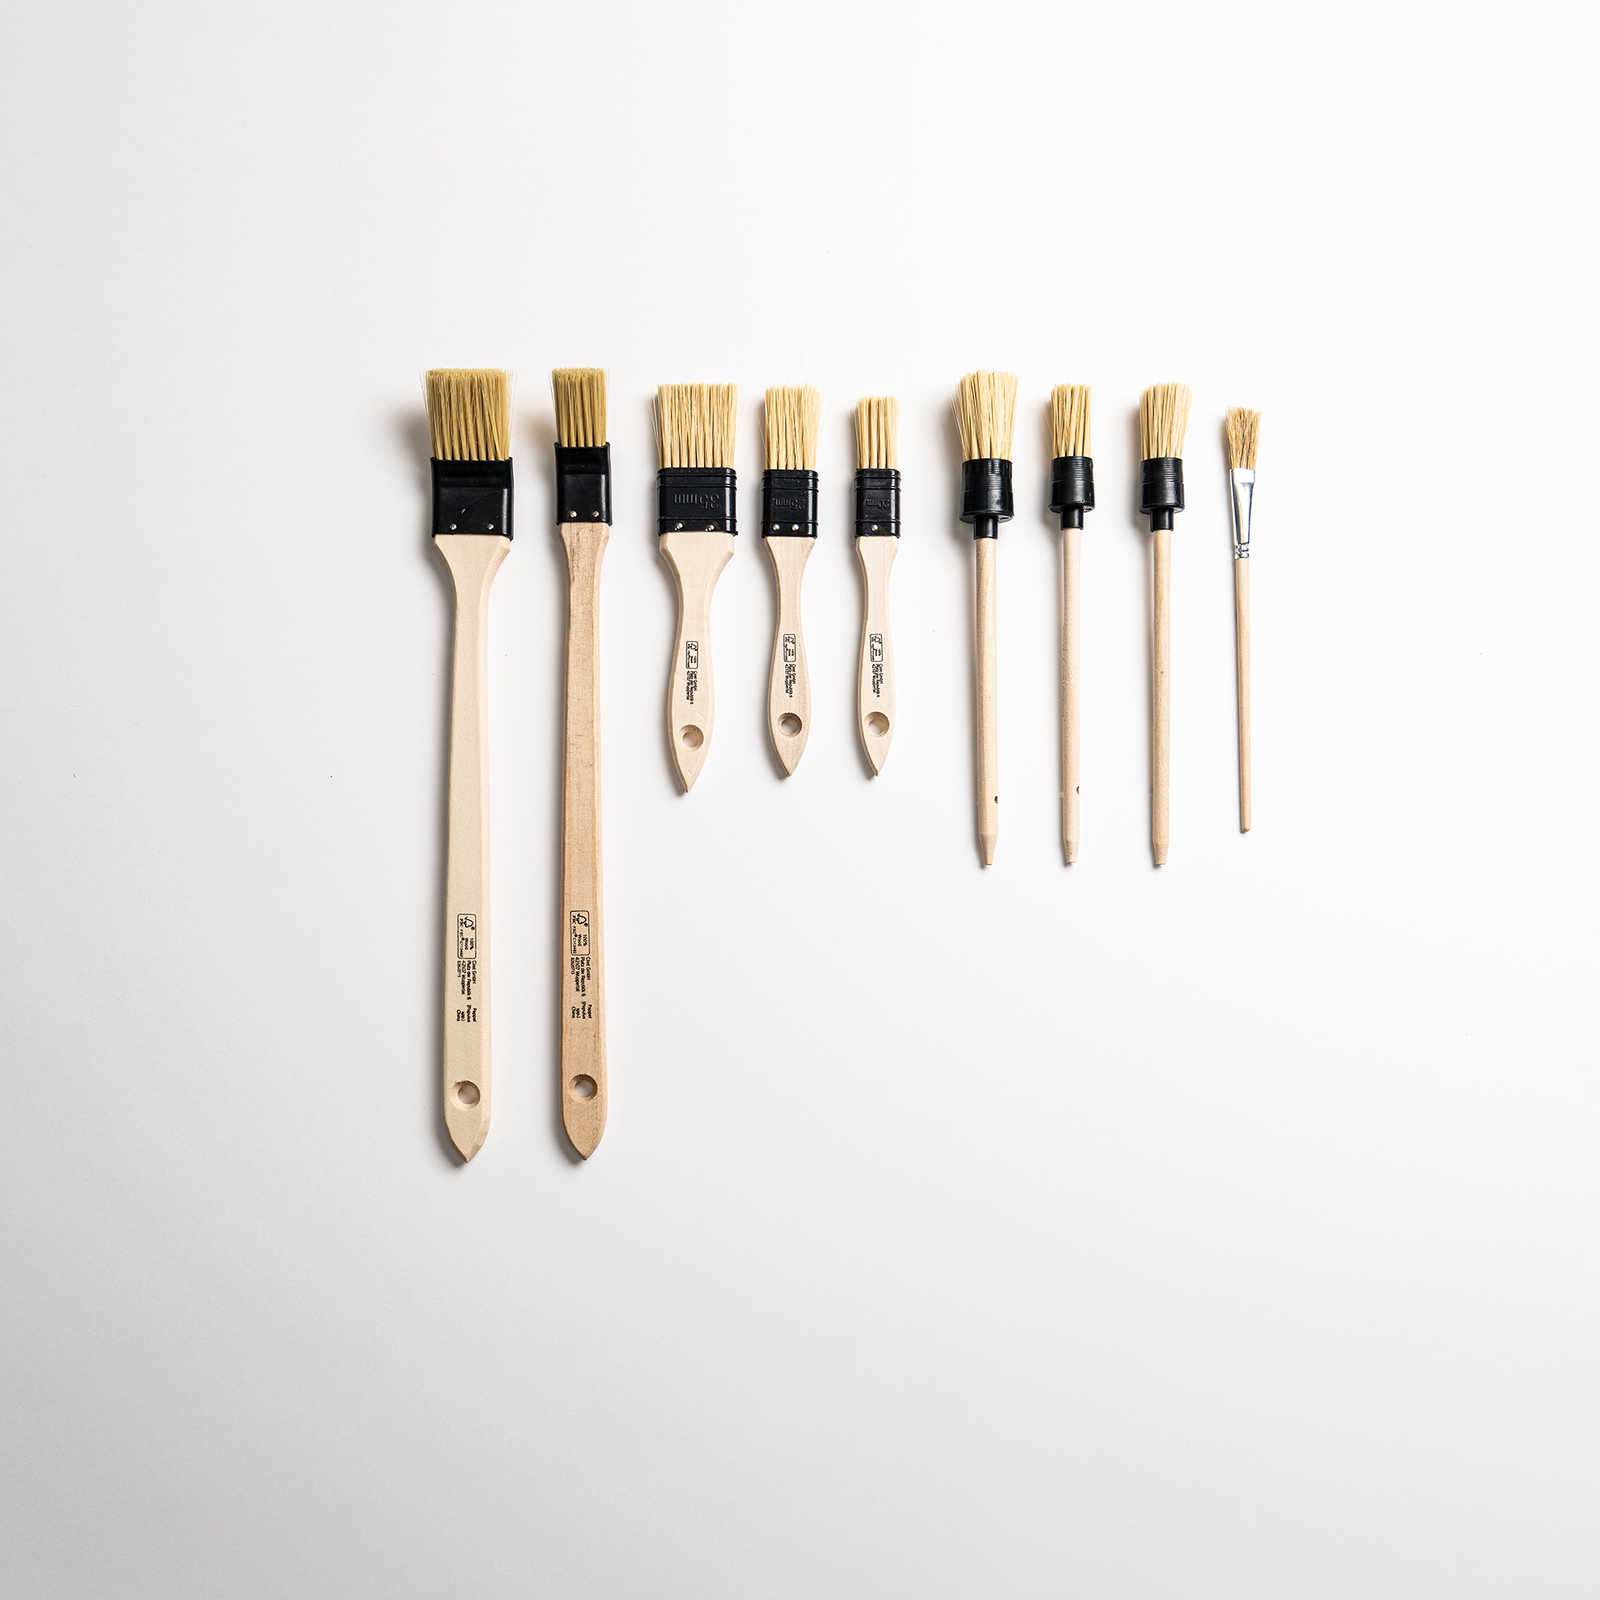 Brush set 10 pieces - high quality wooden handles with synthetic bristles
